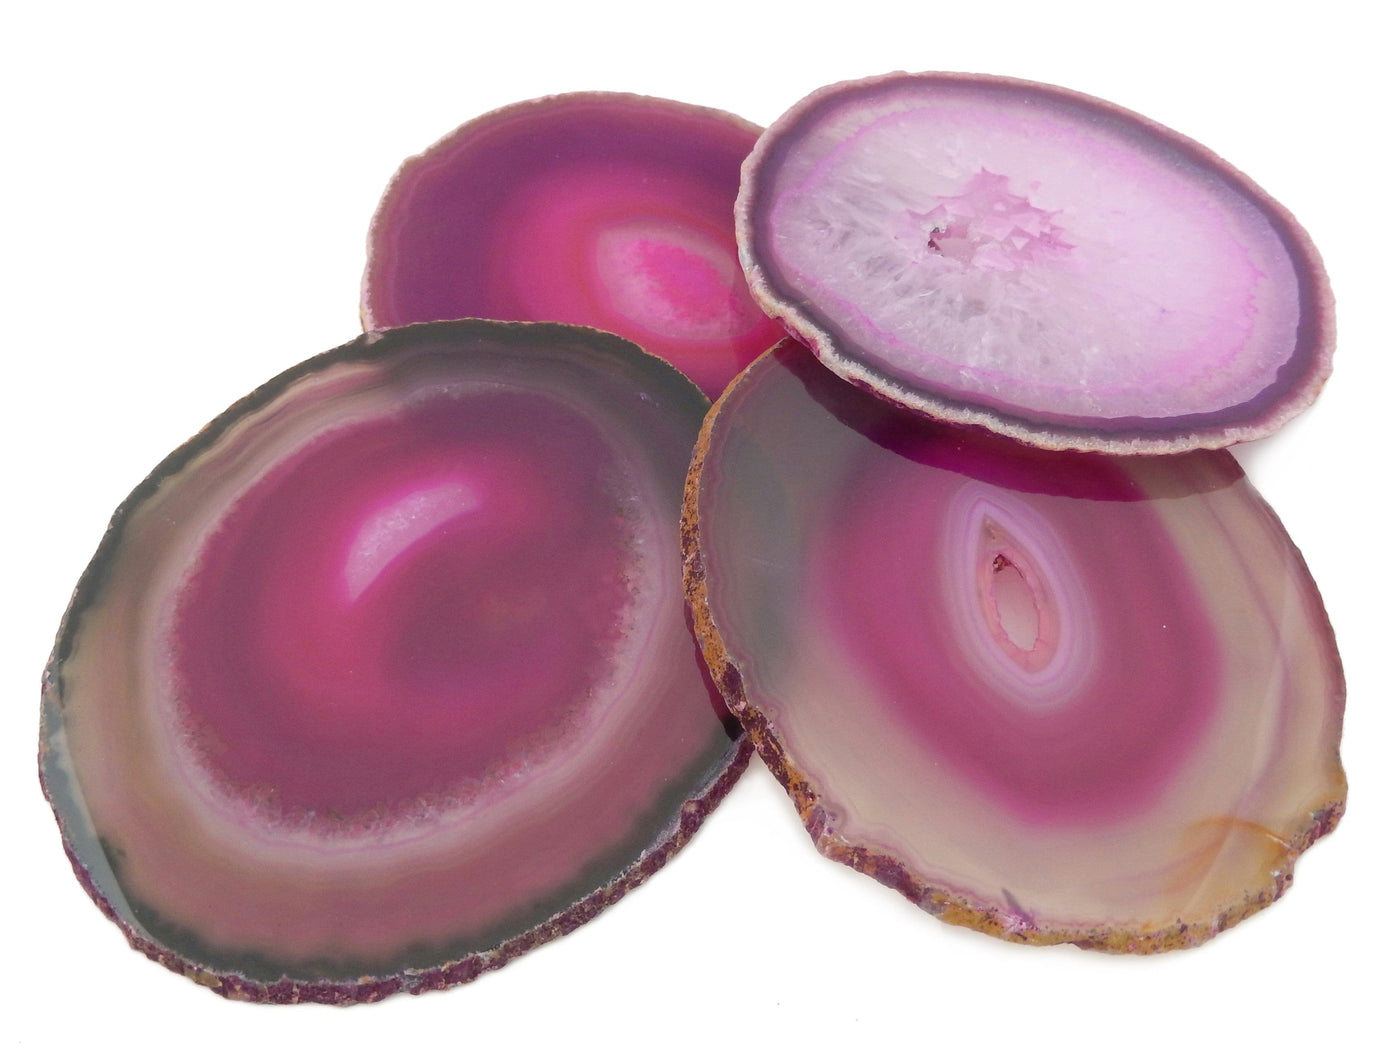 Four Pink Agate Slices #6 on a table showing different colors and markings in the pink